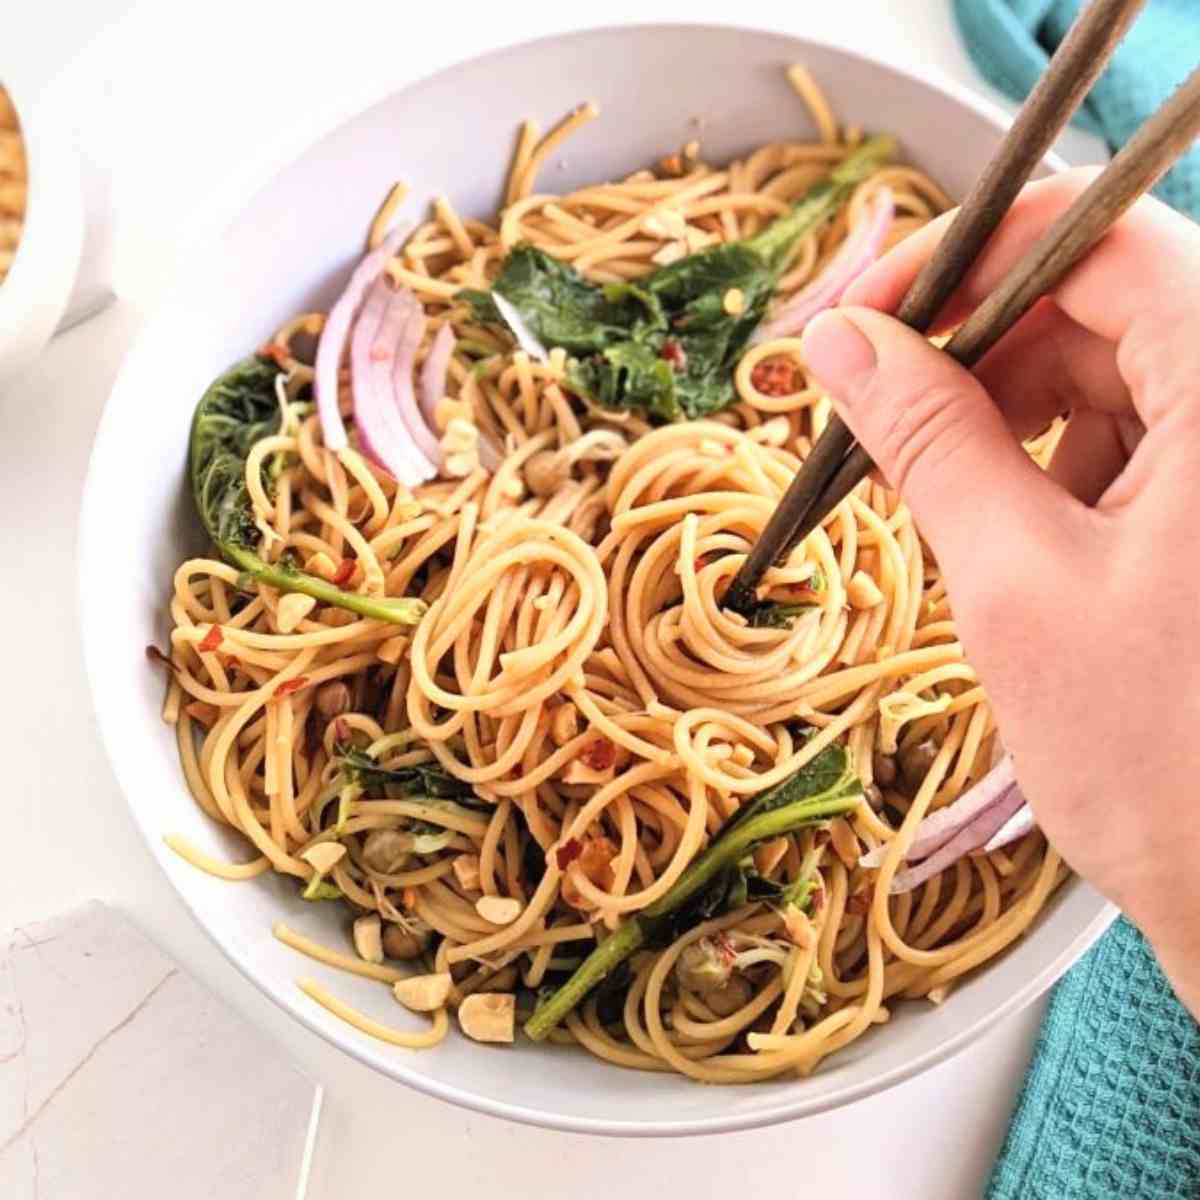 vegan peanut noodles recipe creamy healthy high protein vegetables asian inspired easy weeknight meal dinner lunch 15 minute recipe